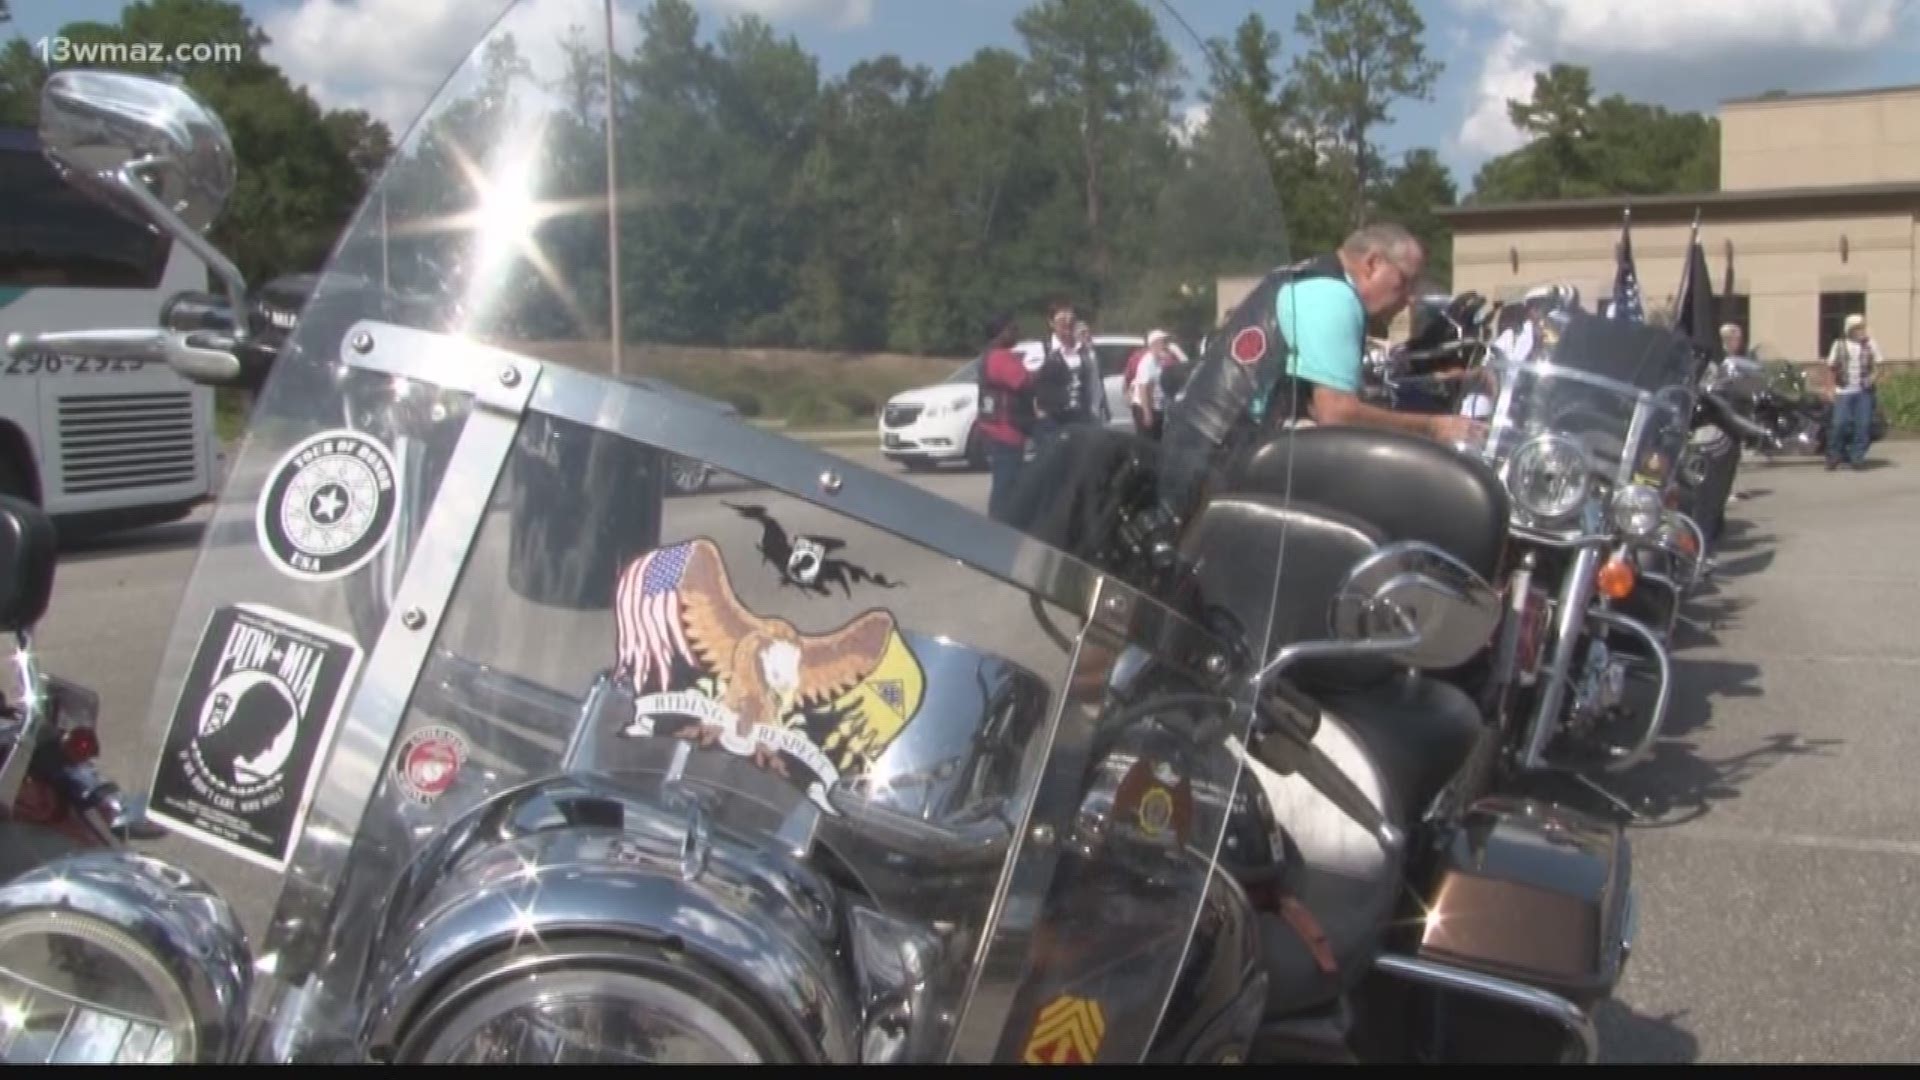 'Ride Home' event honors veterans